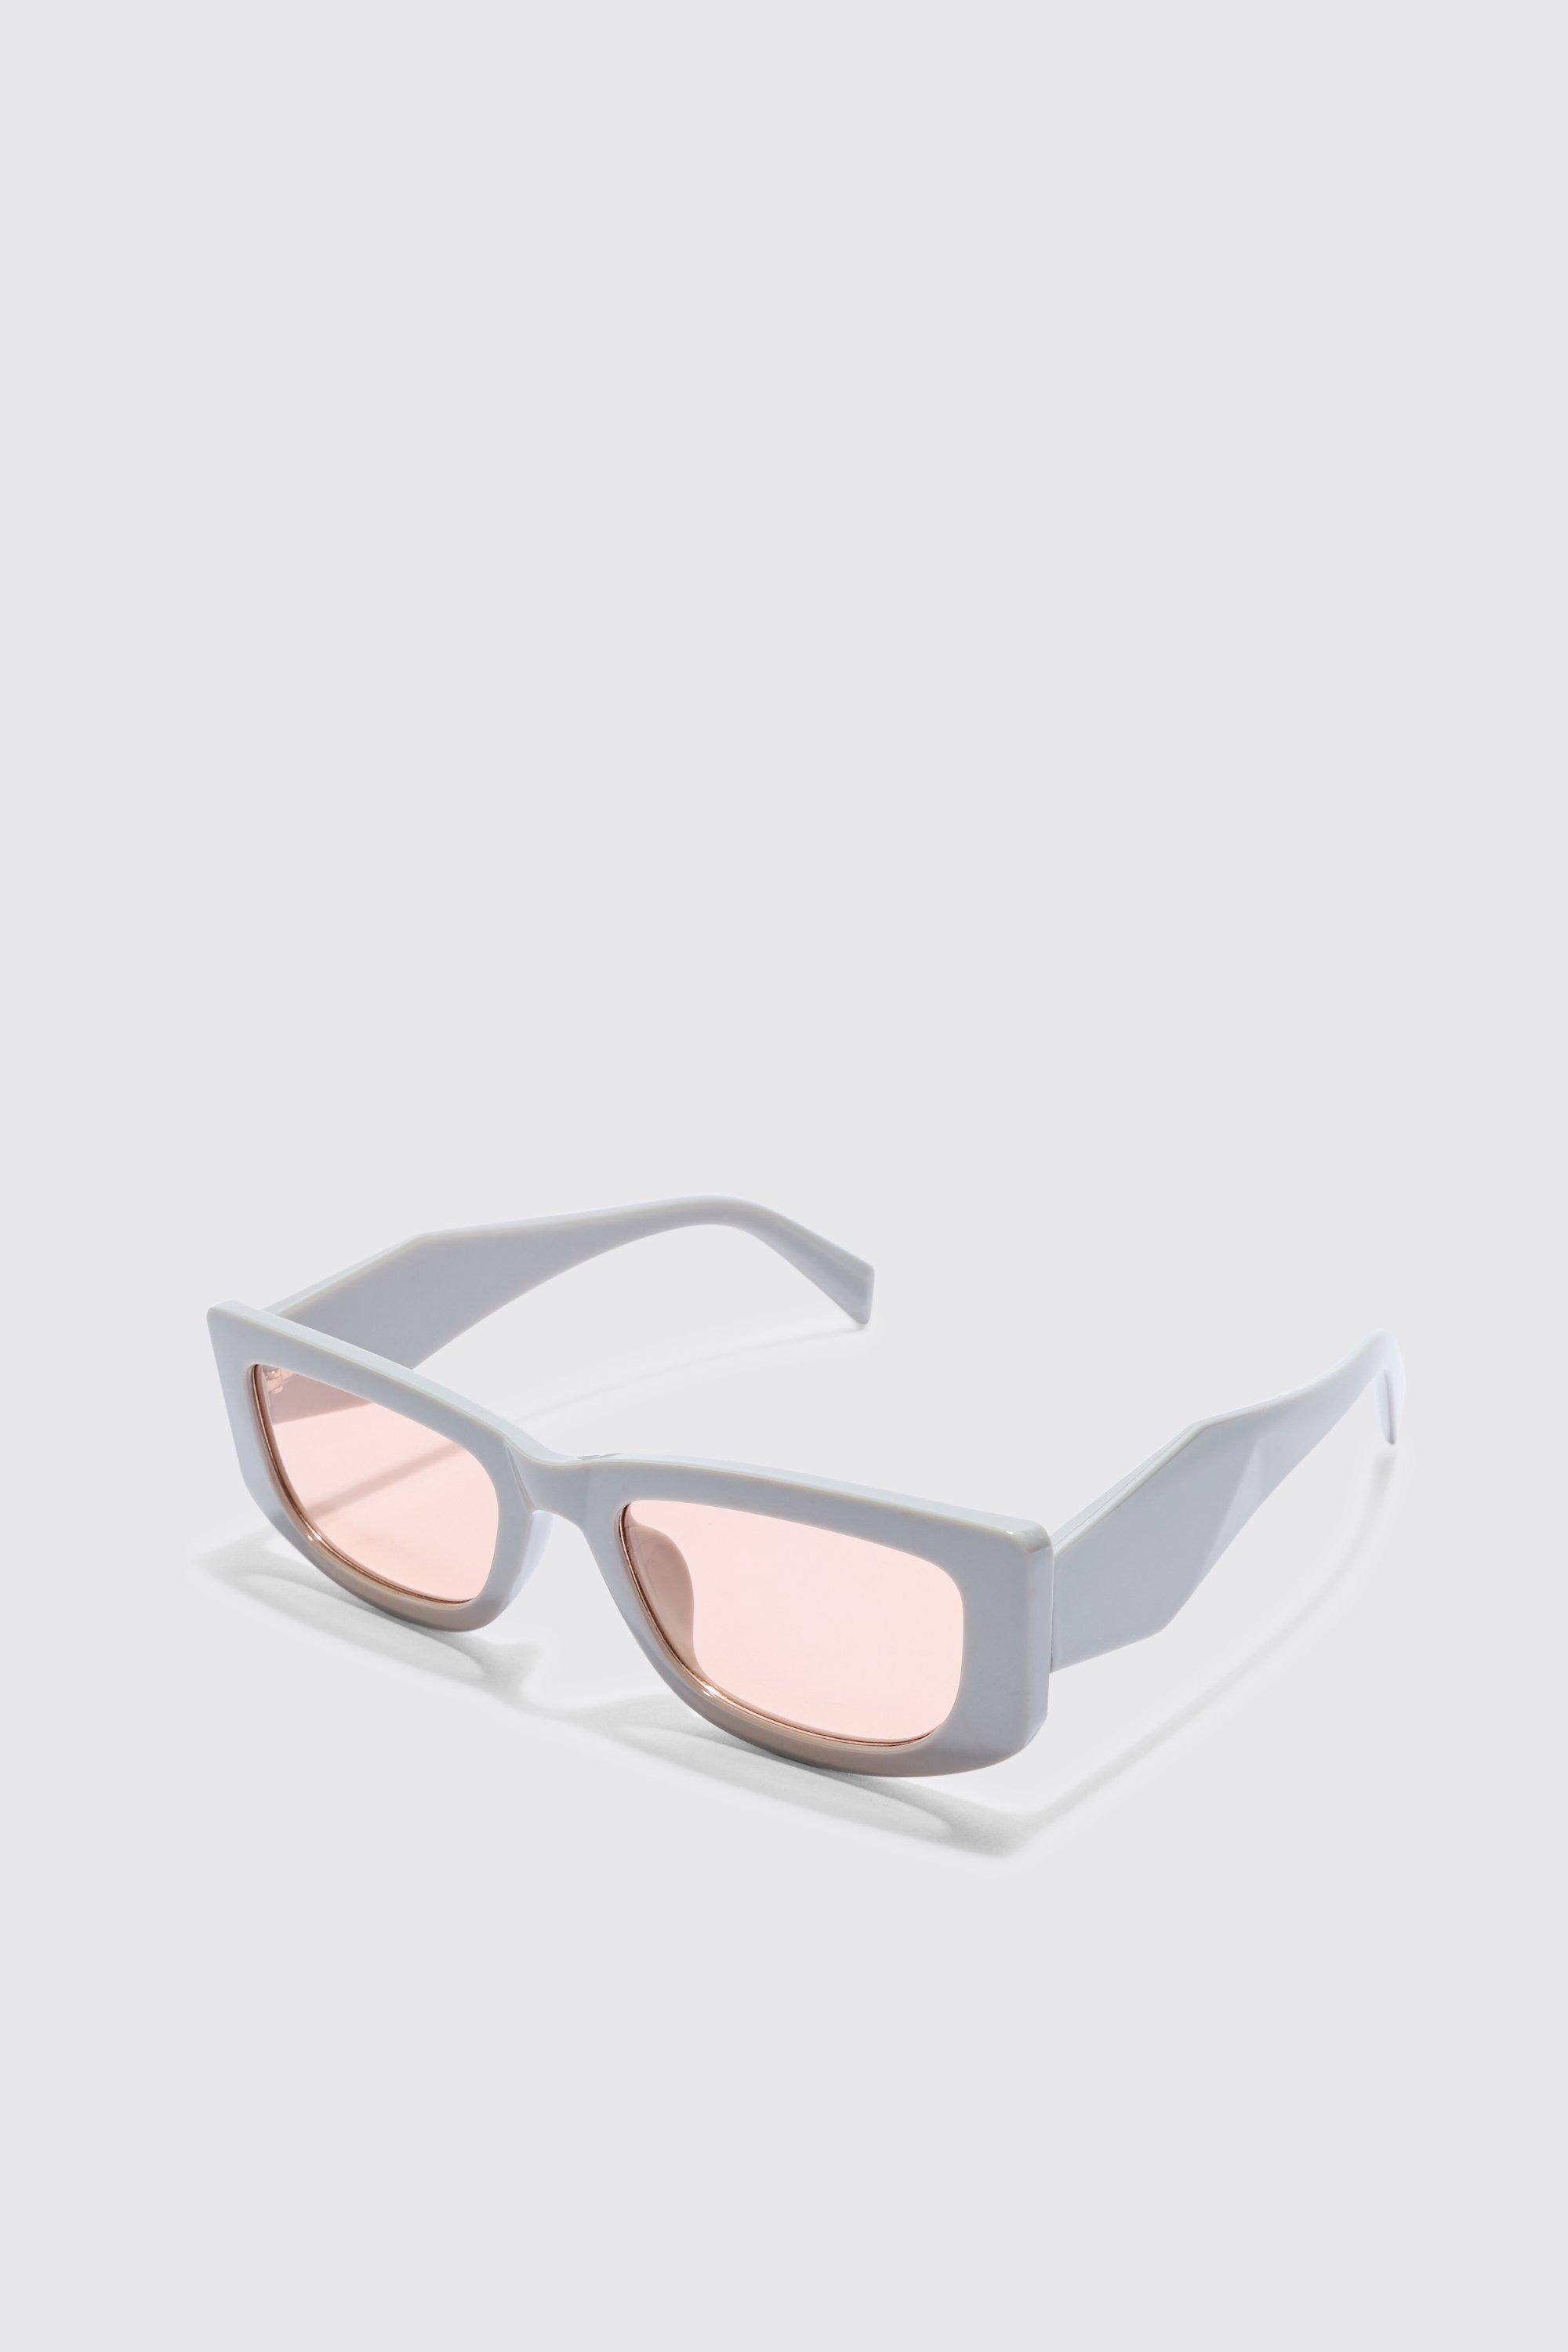 Image of Chunky Angled Frame Sunglasses In Grey, Grigio